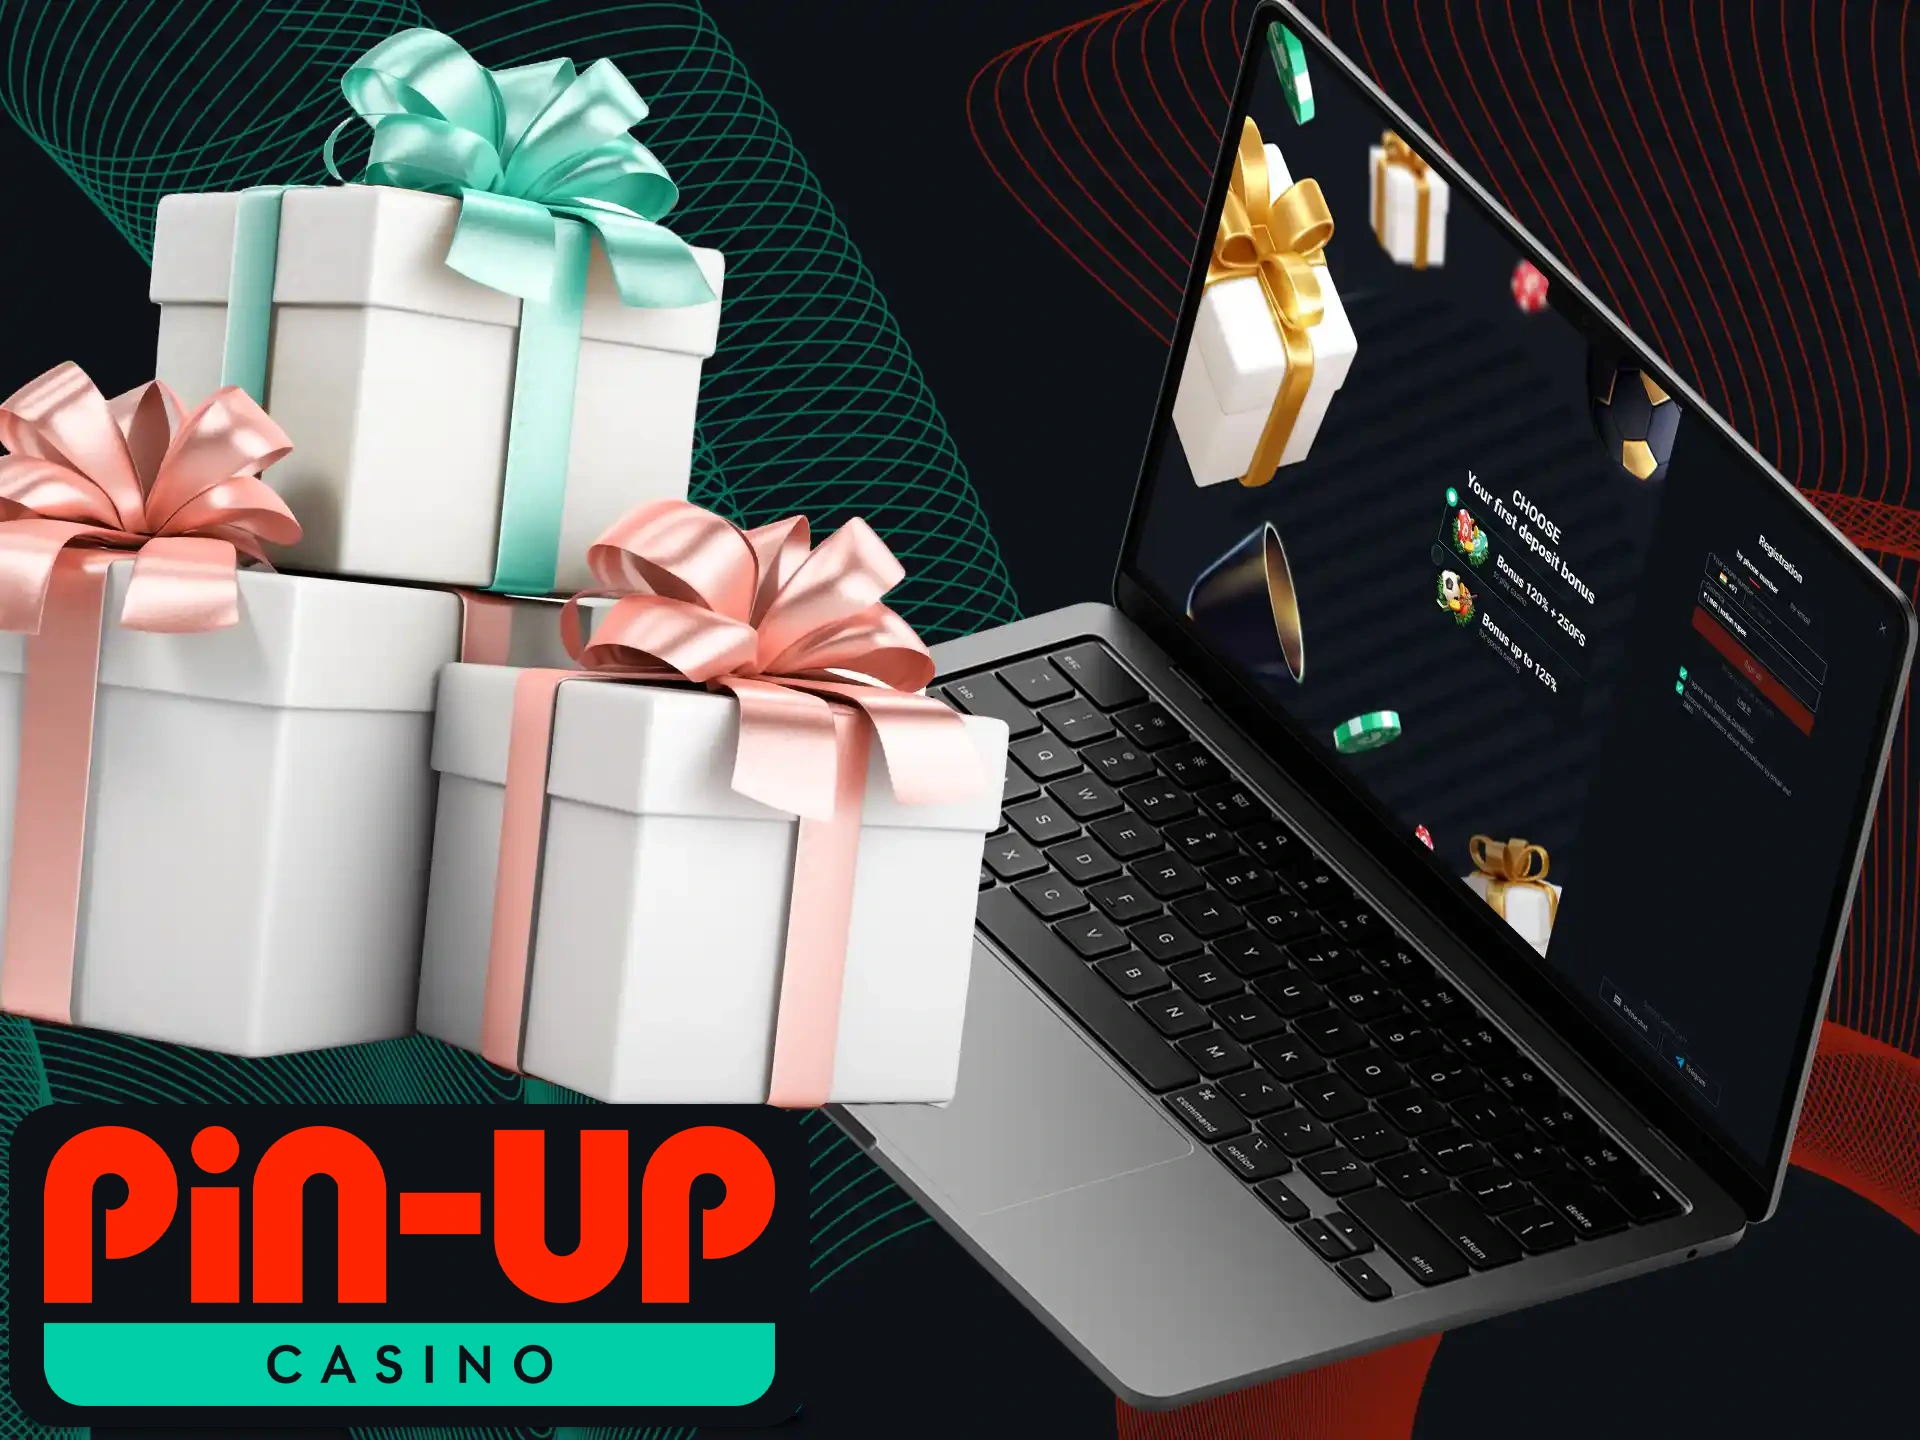 Pin-Up Casino gives you a welcome bonus after your first deposit.